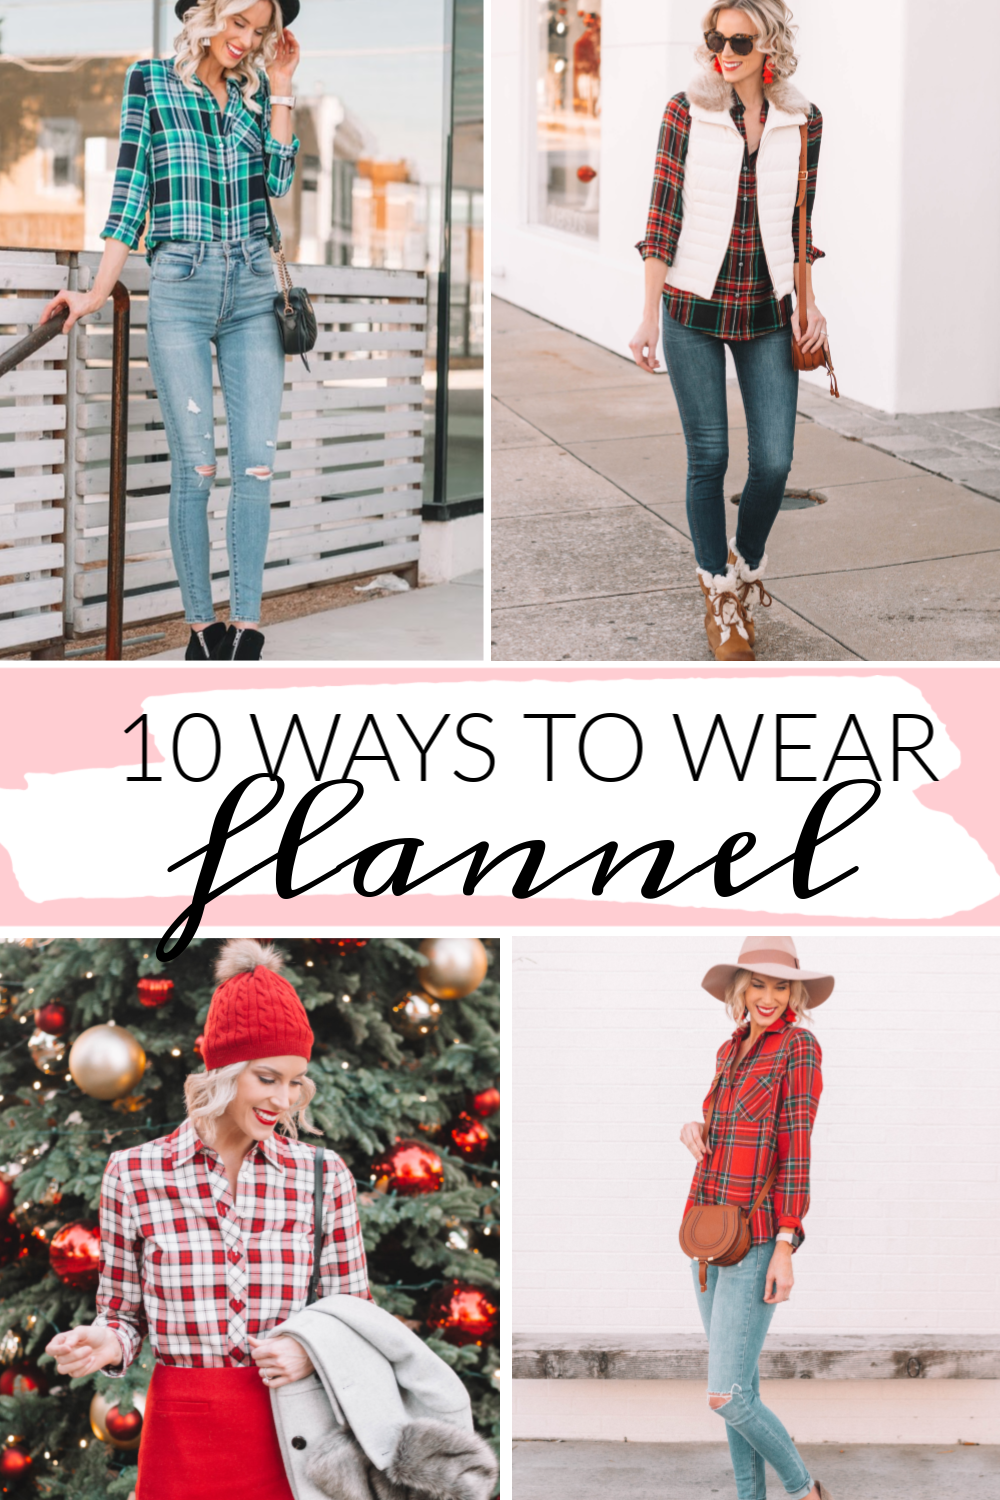 Mount Bank diamond pharmacist 10 Ways to Wear a Flannel Shirt This Fall - Straight A Style